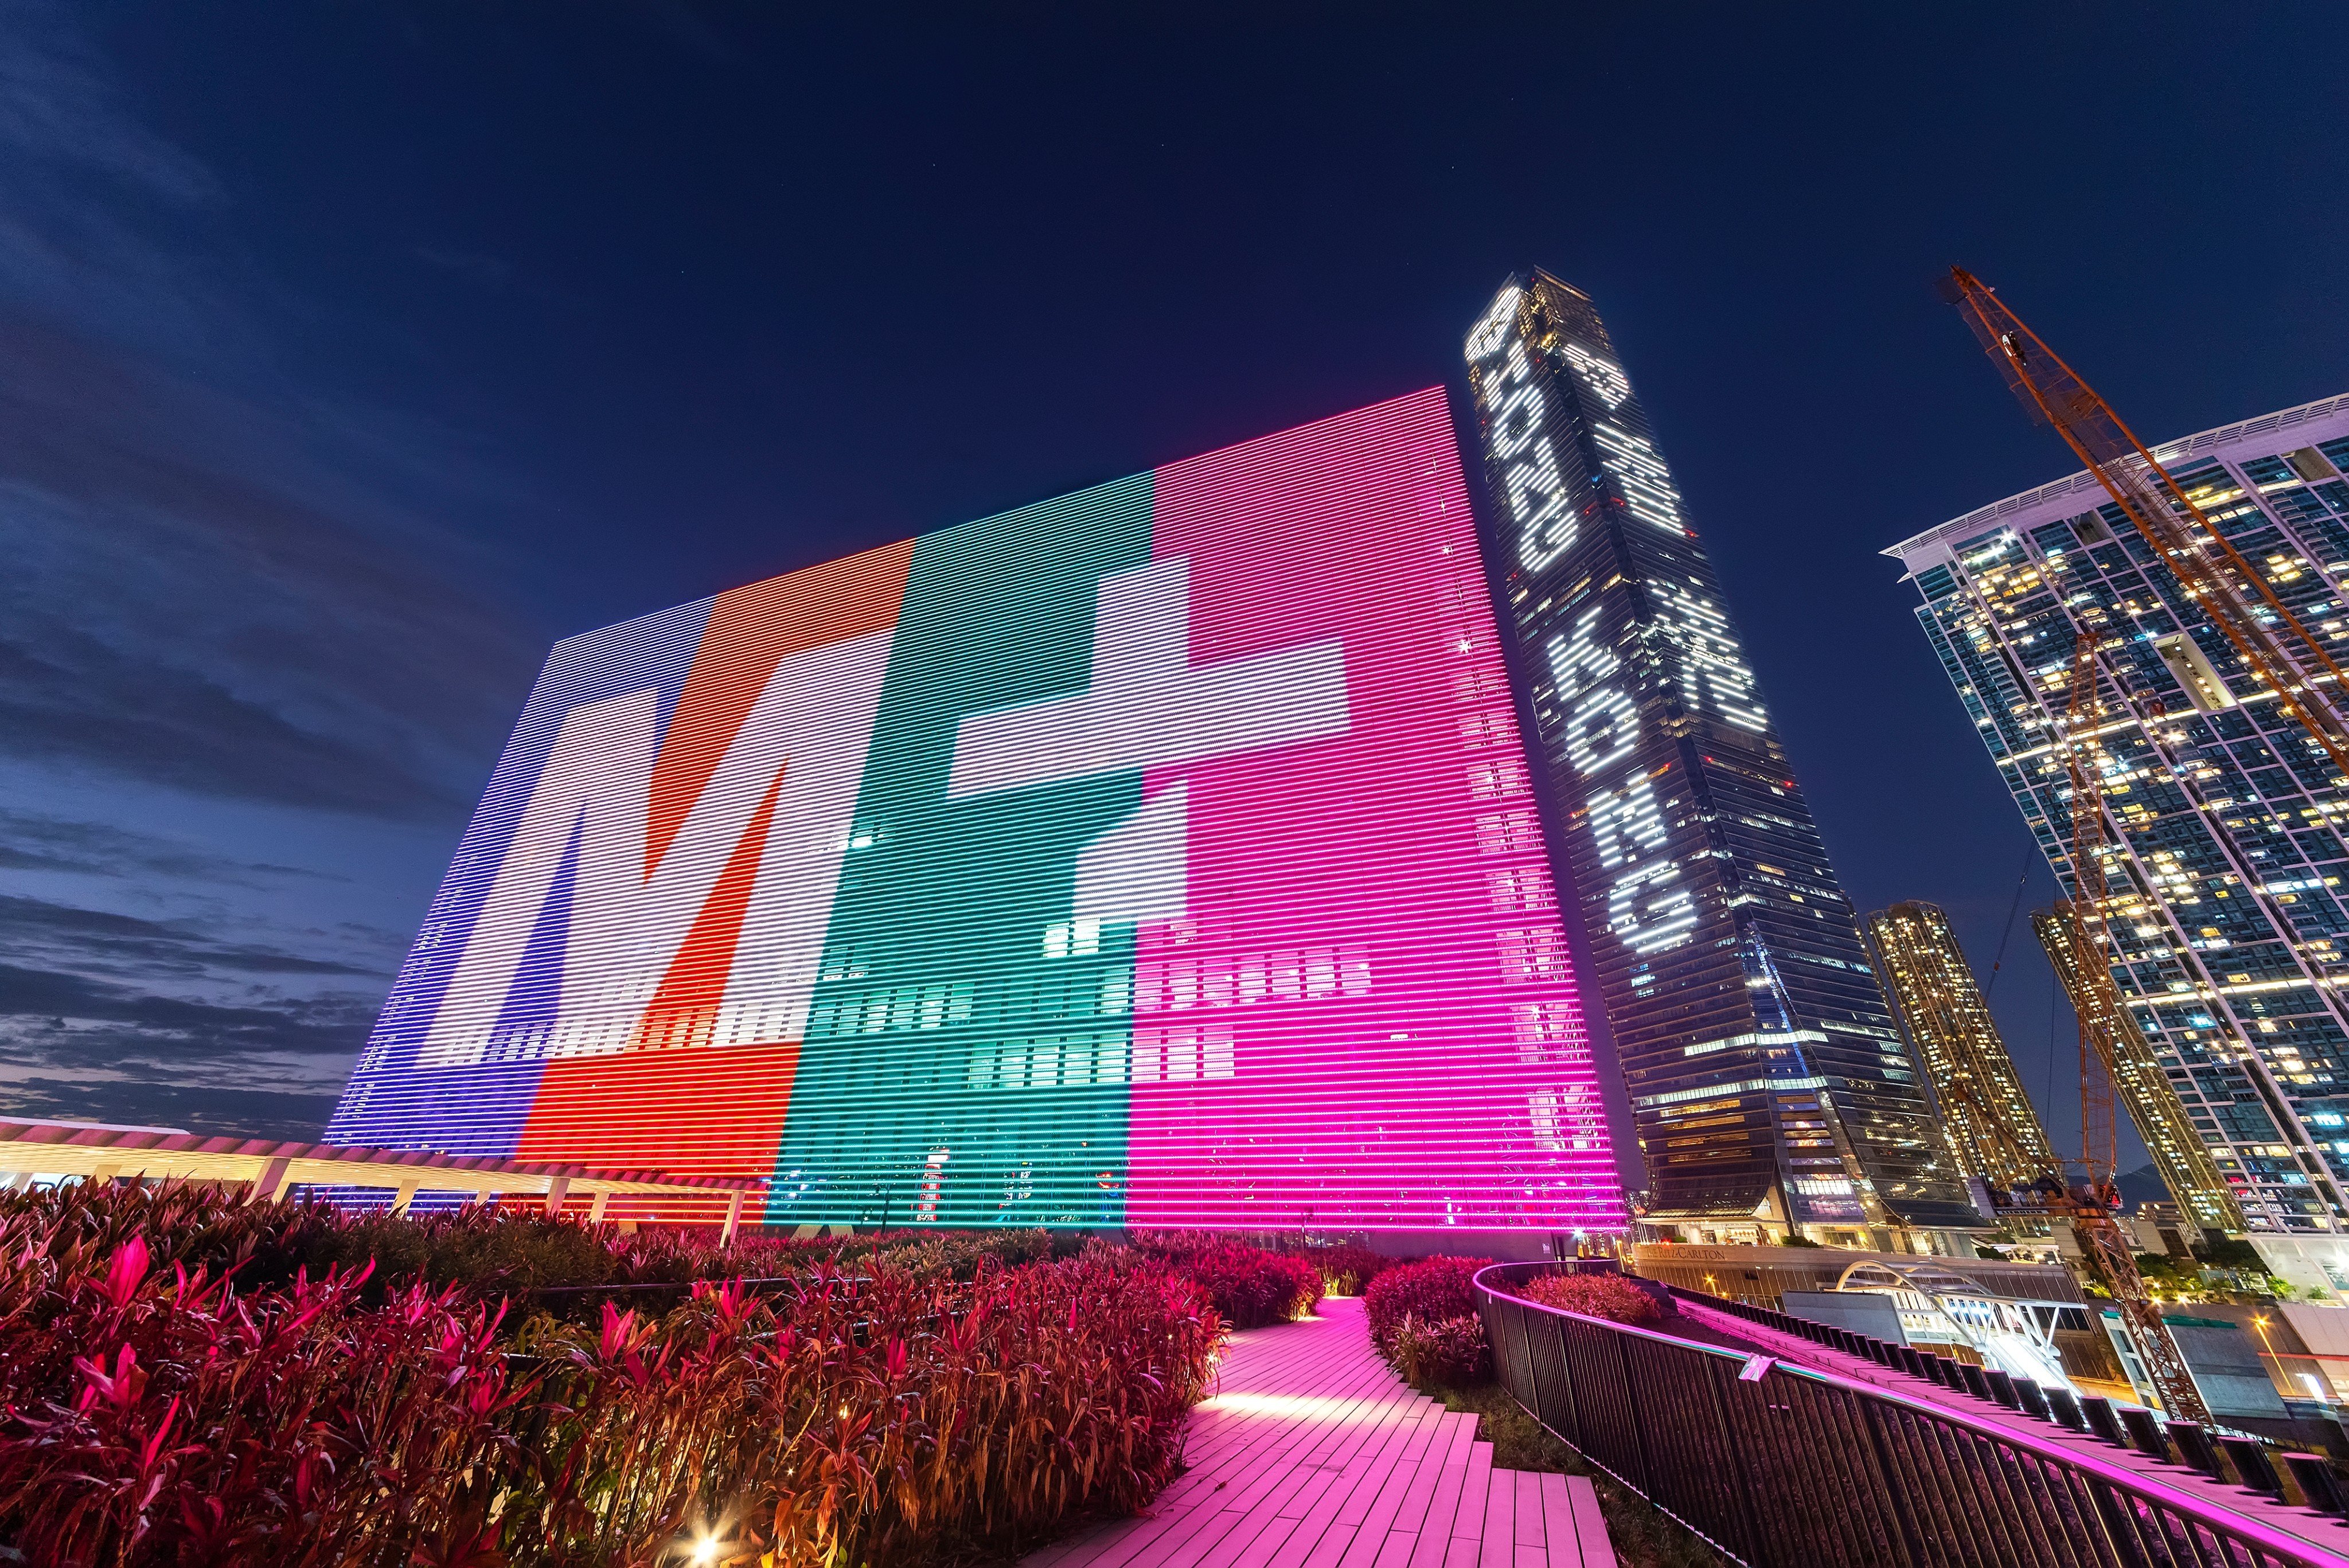 The M+ Facade and museum in the West Kowloon Cultural District, framed on the right-hand side by Hong Kong’s tallest building, the International Commerce Centre. Photo: Shutterstock